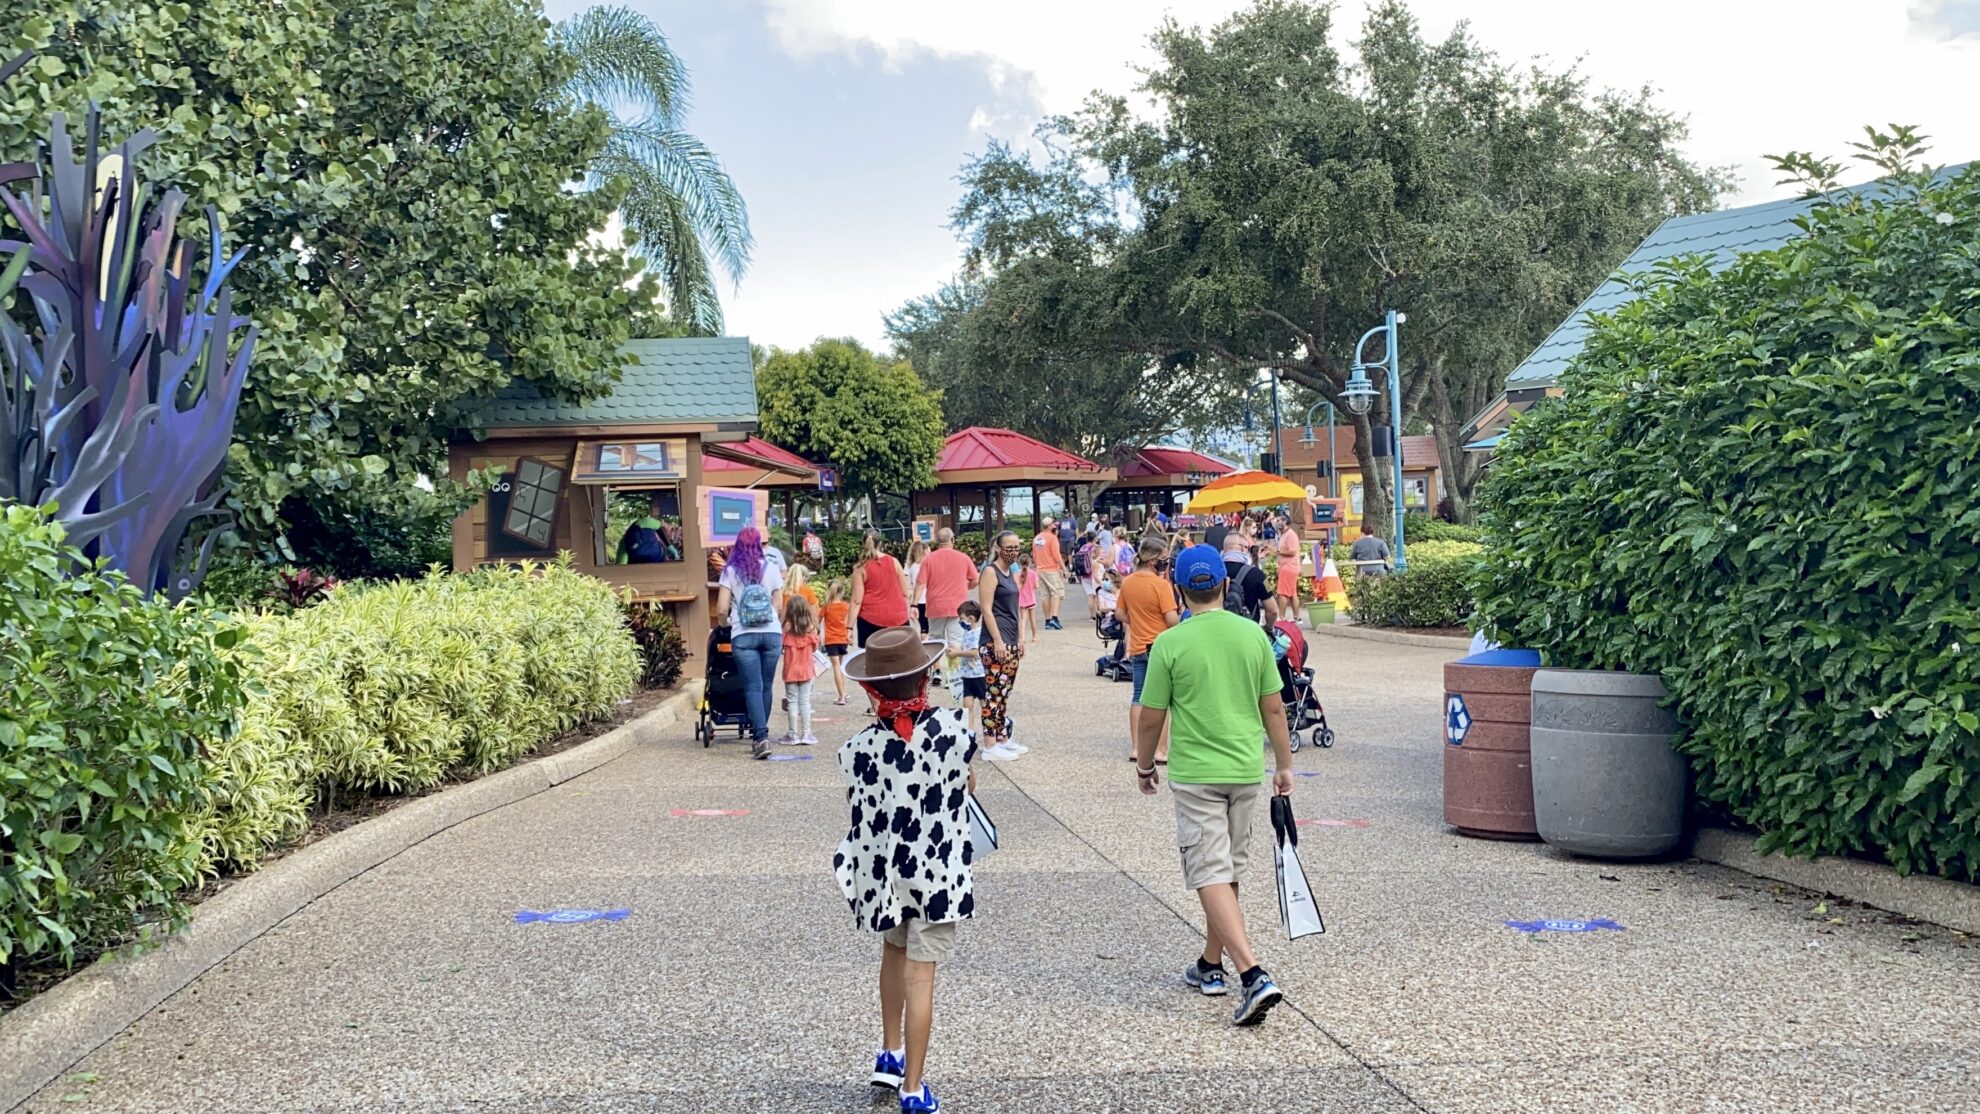 Children walking at a distance at SeaWorld Orlando Spooktacular trick or treating.